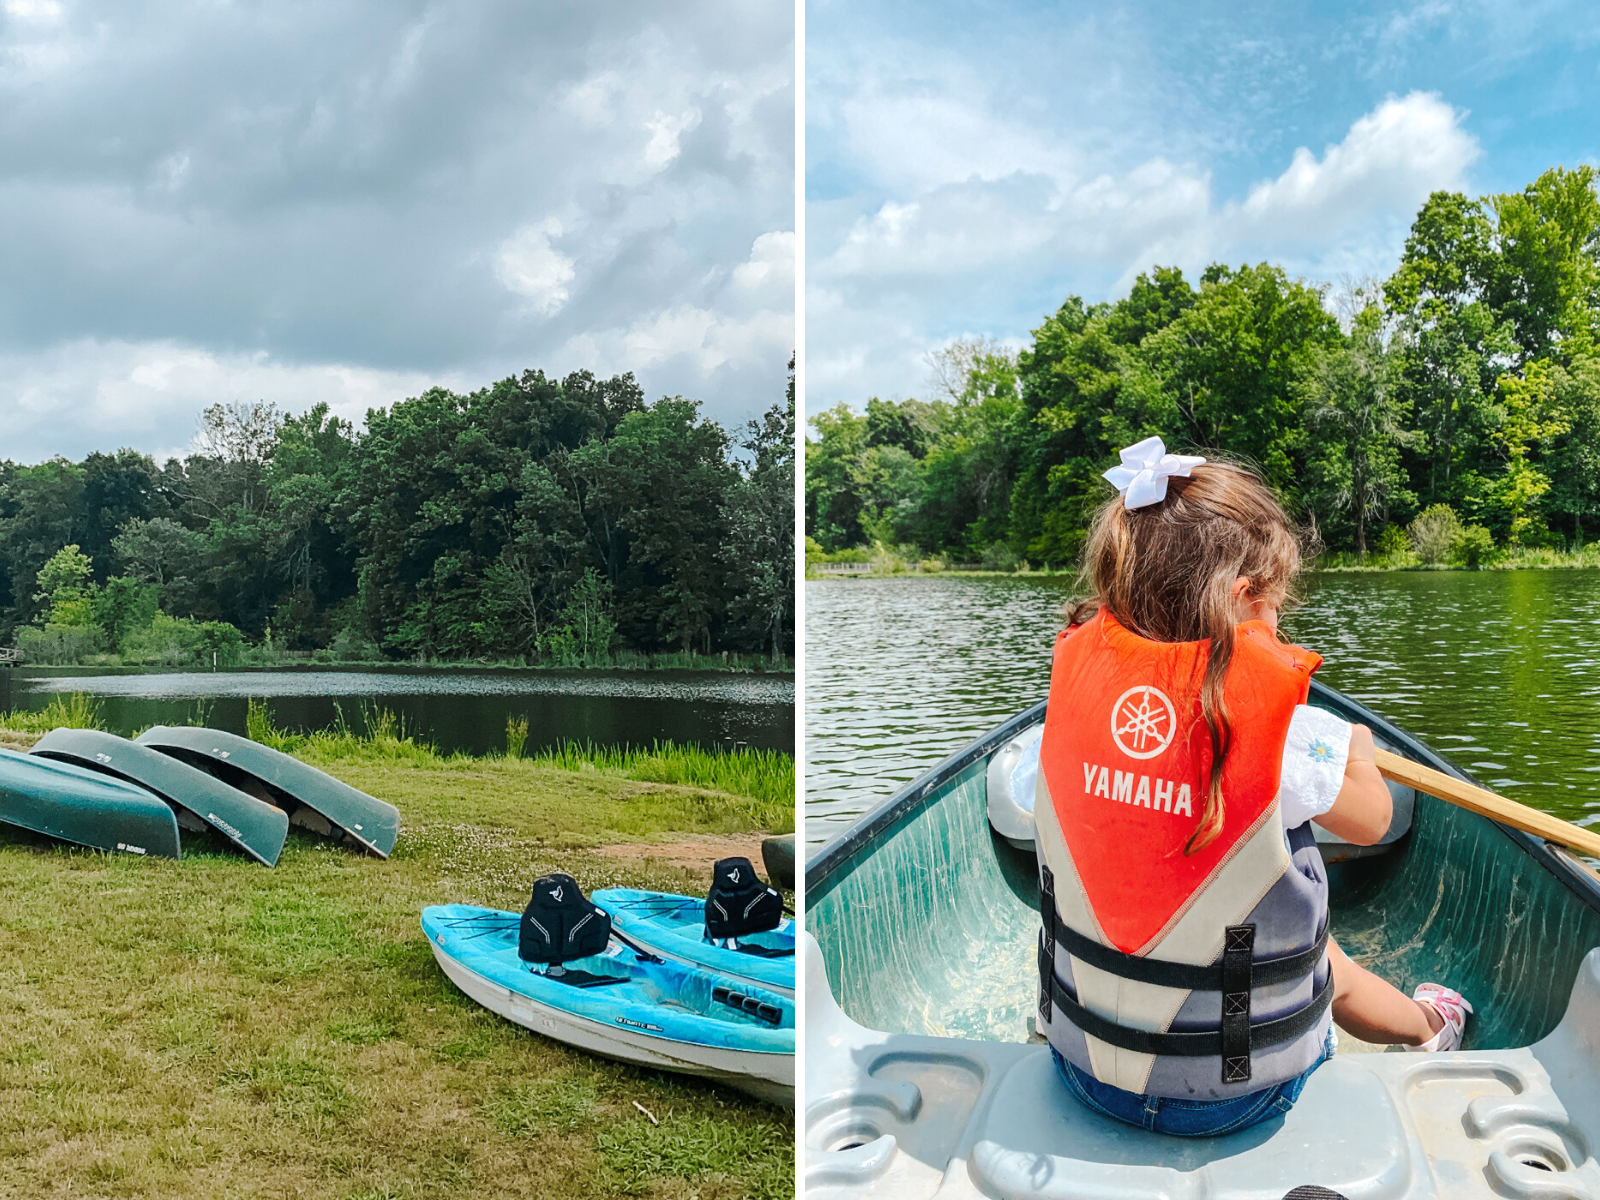 Barnsley Resort by popular Memphis travel blog, Lone Star Looking Glass: collage image of some canoes lying next to each other on the grass and a young girl wearing a life jacket and sitting in a canoe on a lake. 